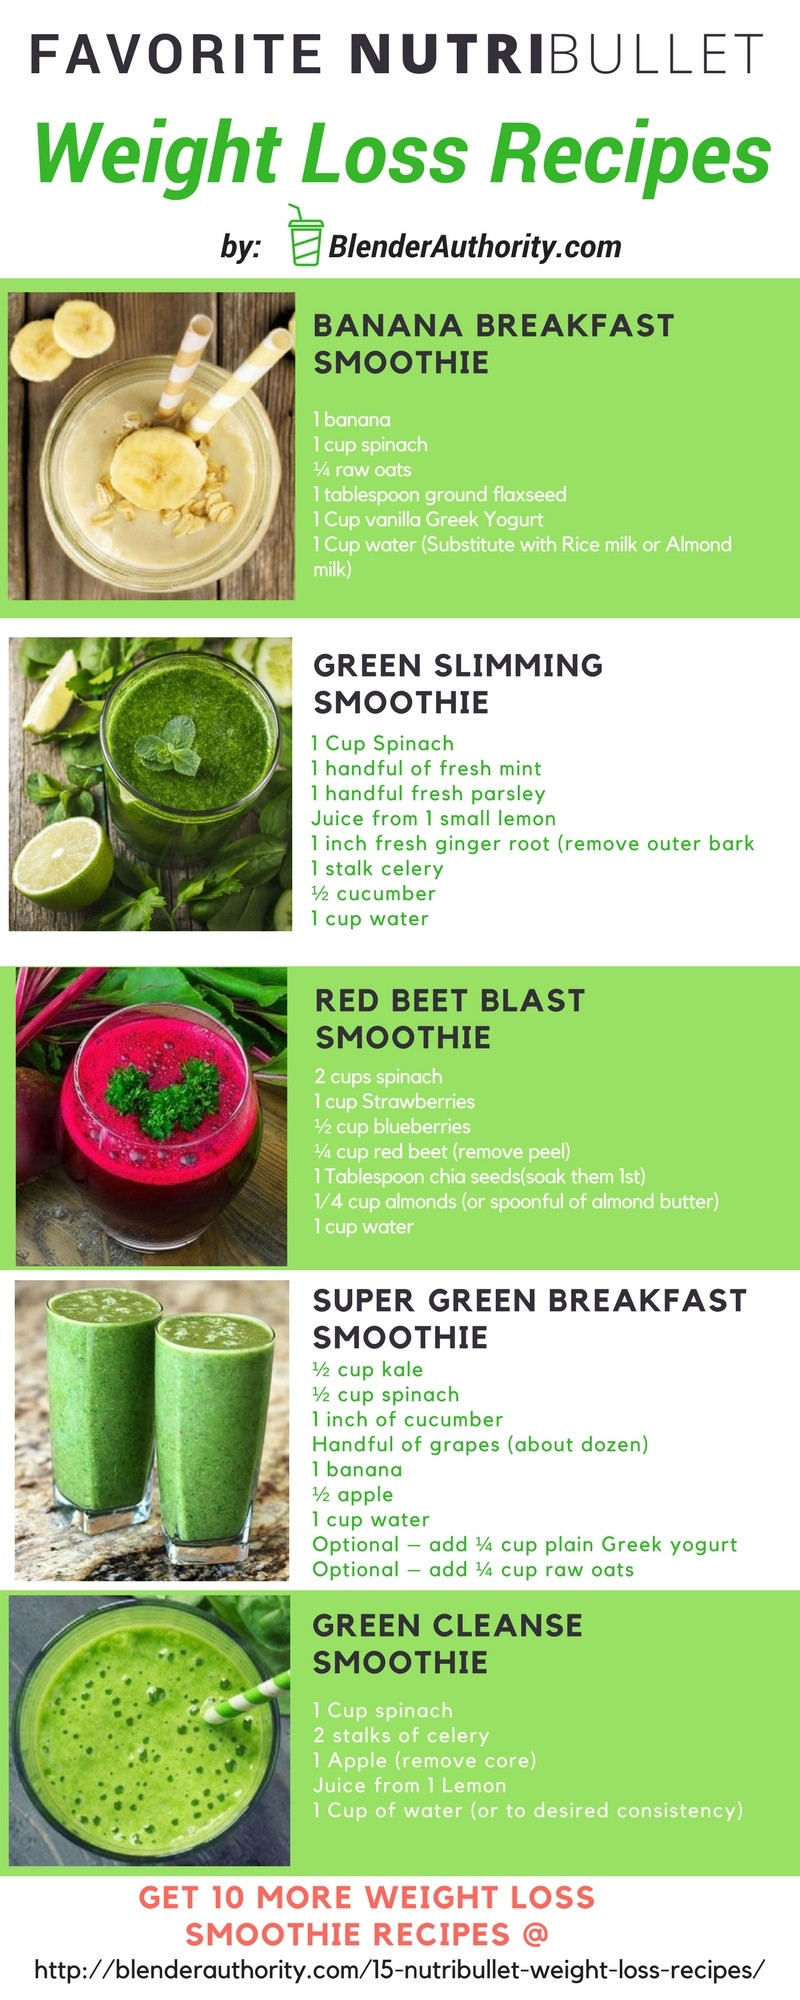 Loss Weight Smoothie Recipes
 Weight Loss Green Smoothie Recipes Uk